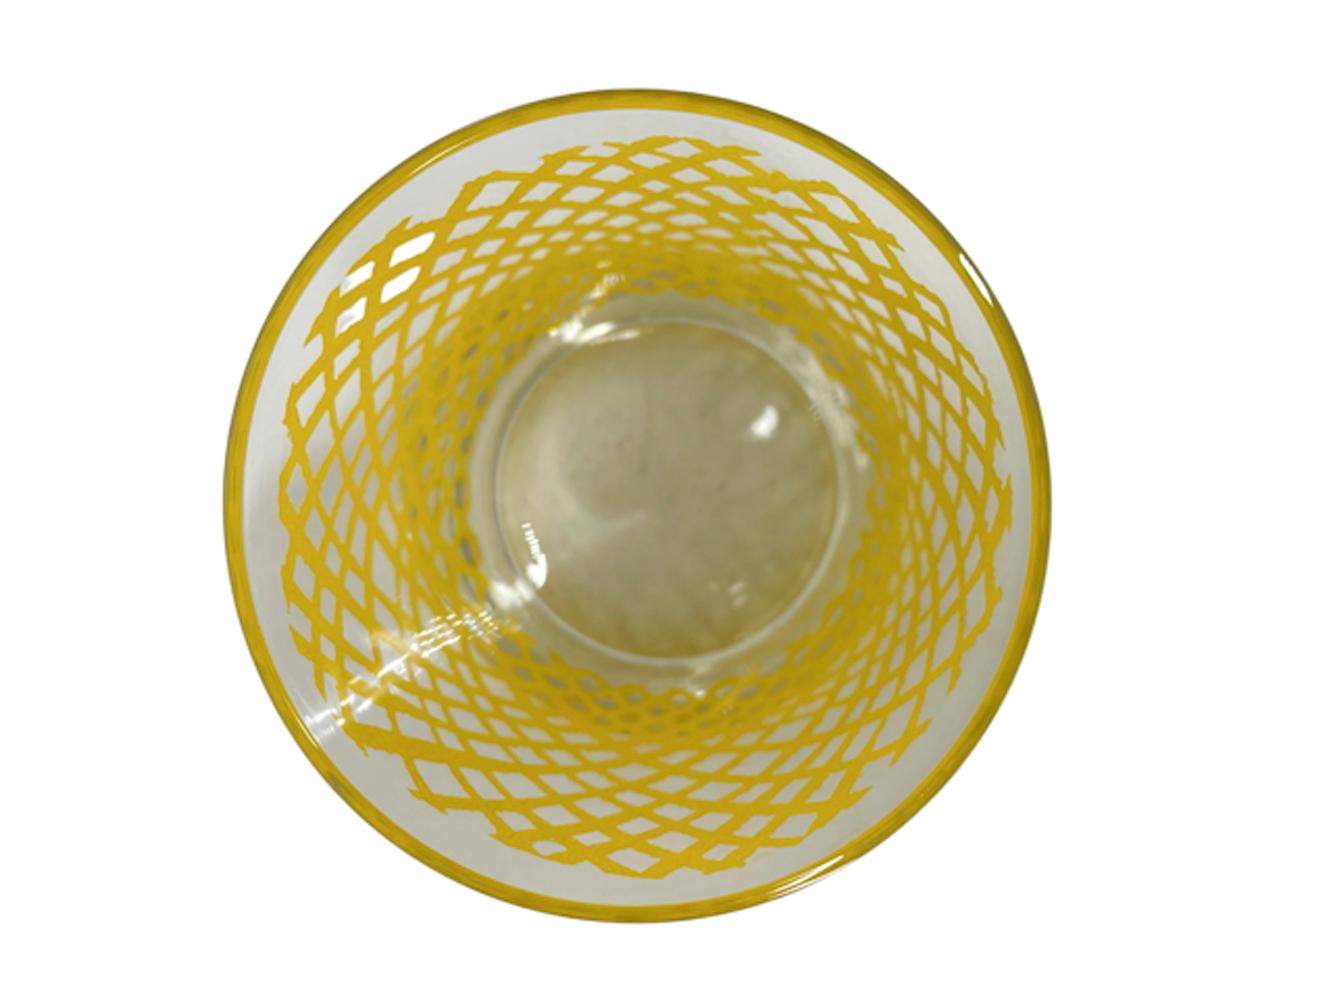 American Vintage Georges Briard Rocks Glasses w/Yellow Net Non-Slip Textured Surface For Sale